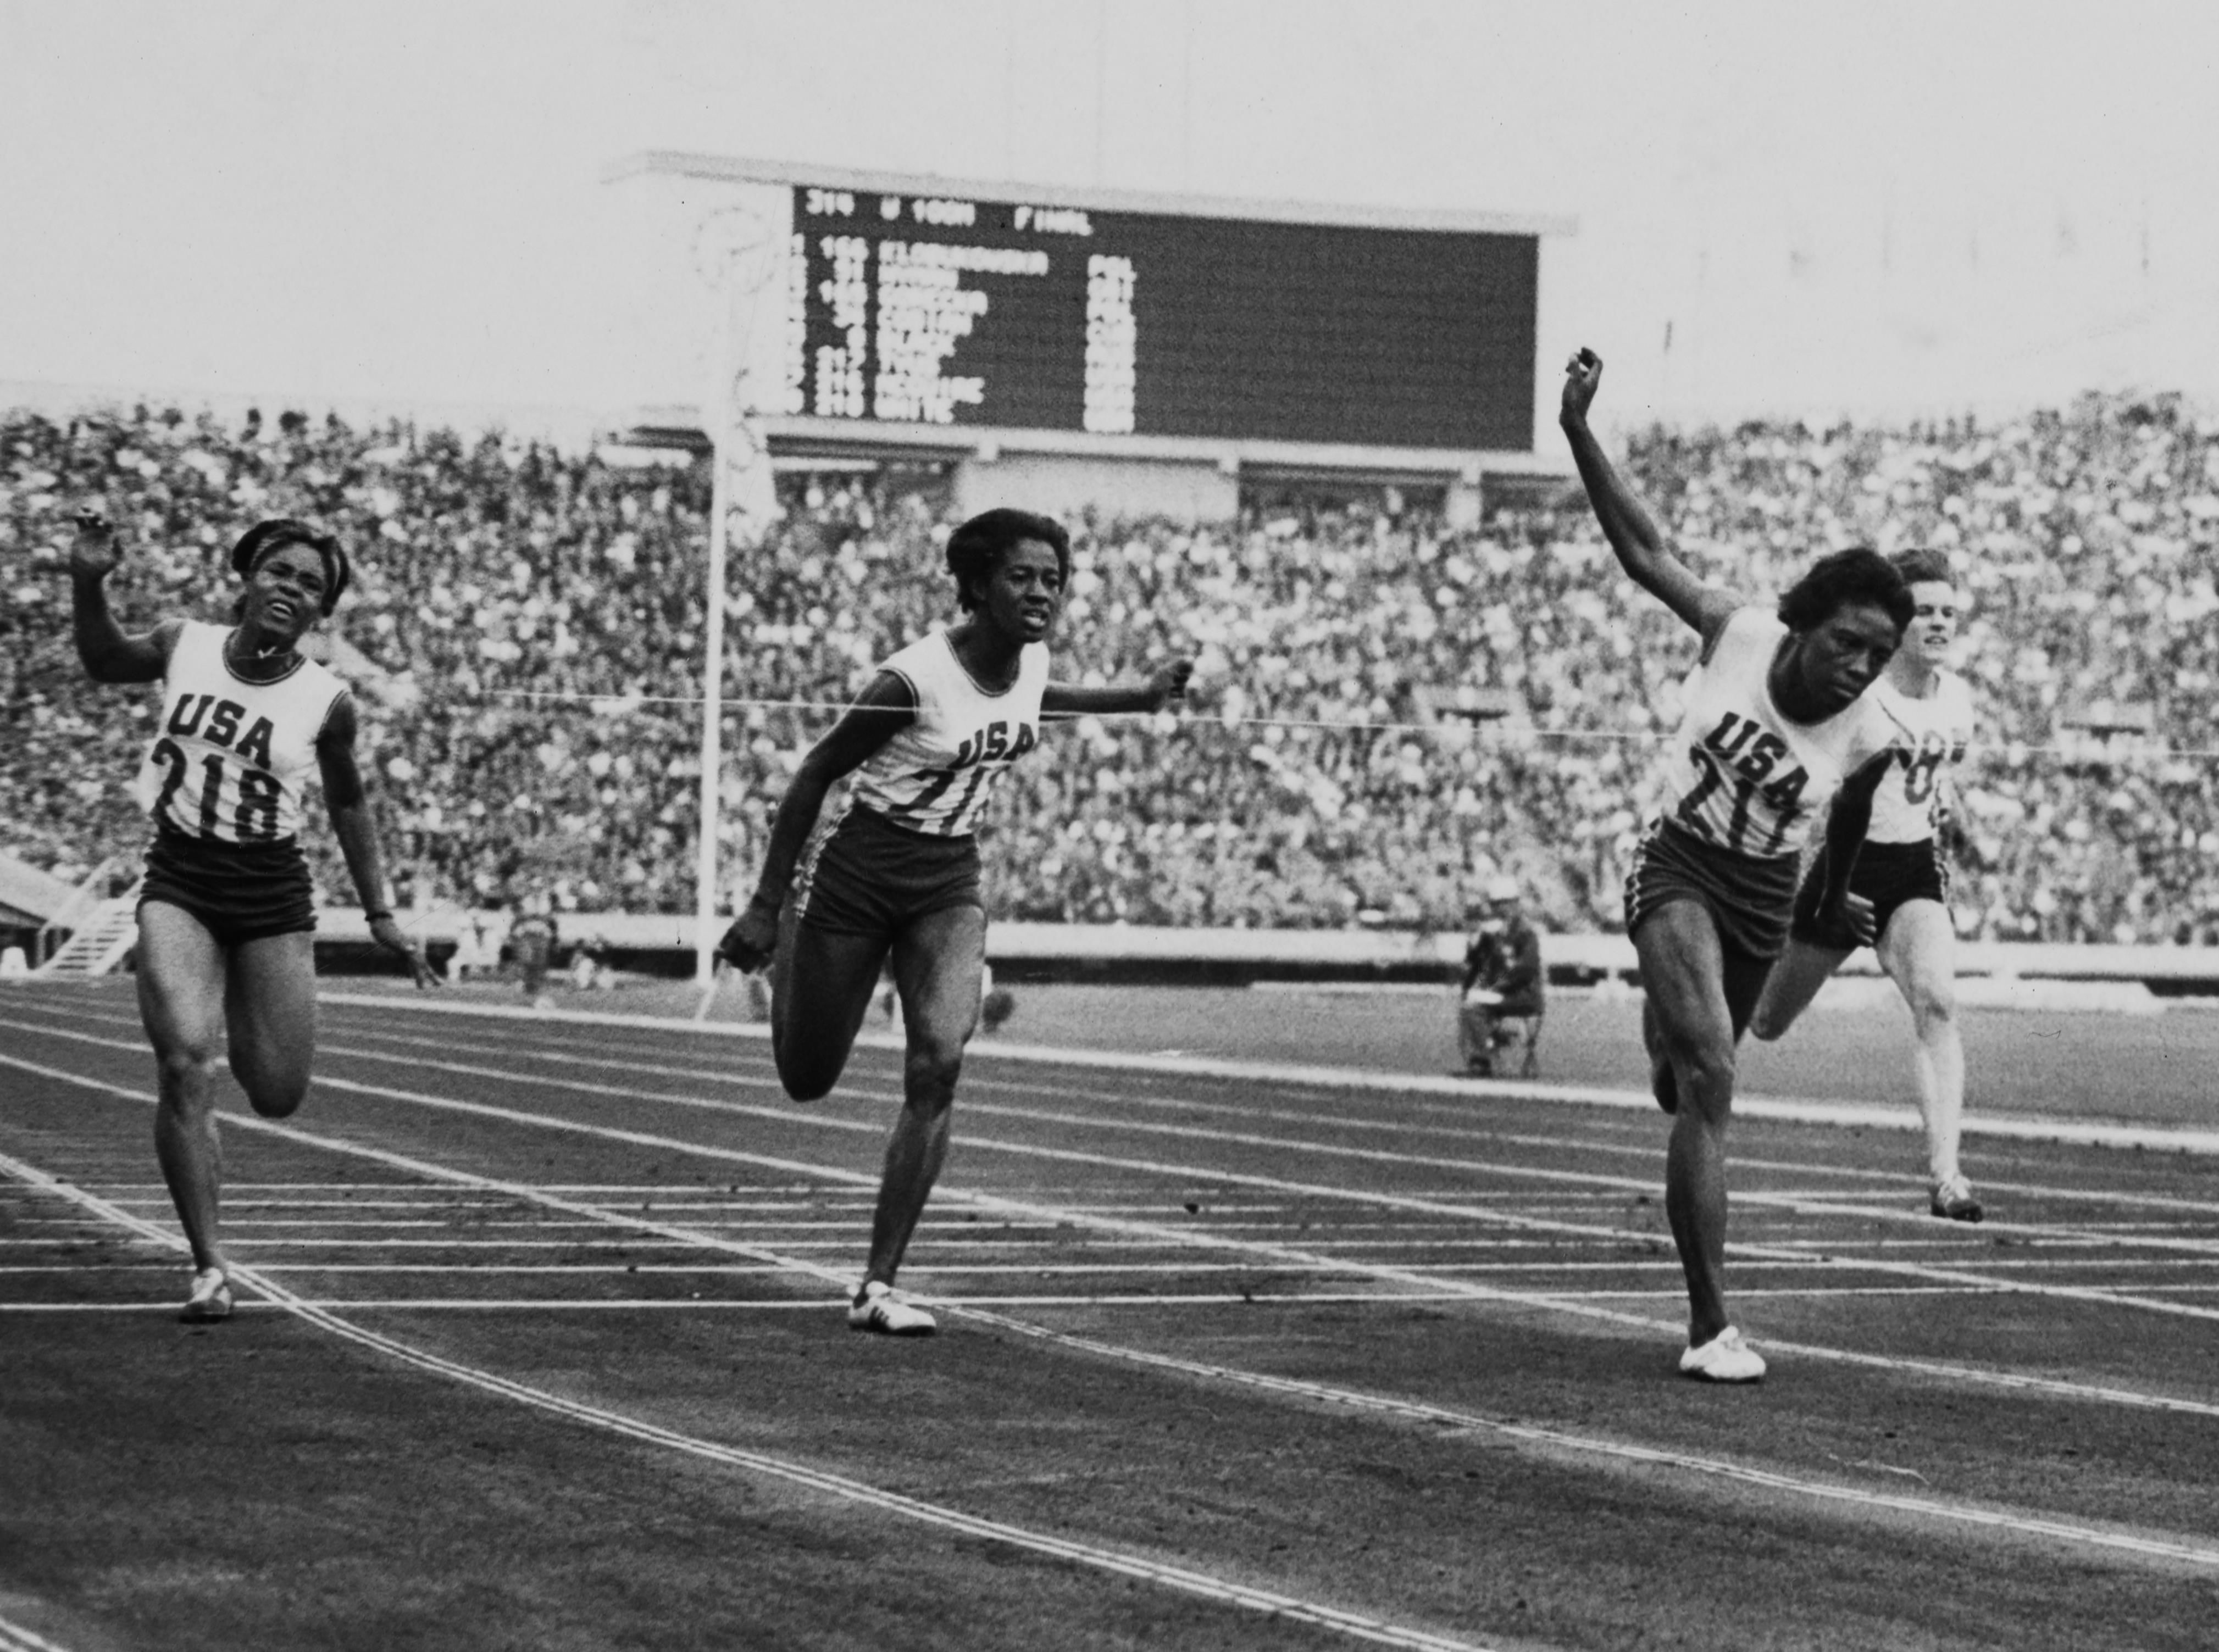 Wyomia Tyus wins the 100m at the 1964 Olympic Games in Tokyo